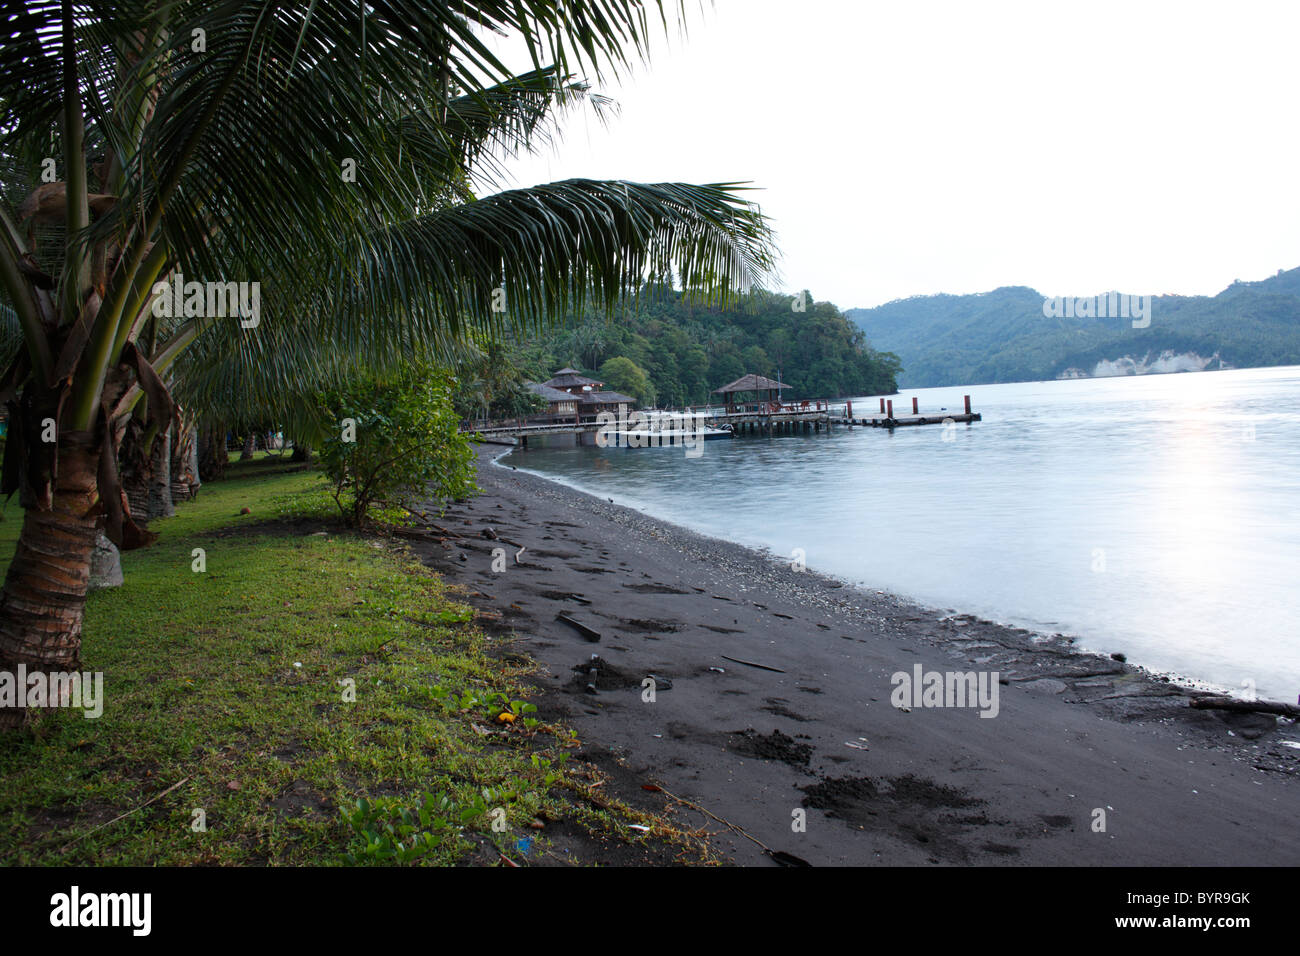 Palm trees, shore line of Lembeh Strait and dock as seen from the Kungkungan Bay Resort in the early morning. Stock Photo